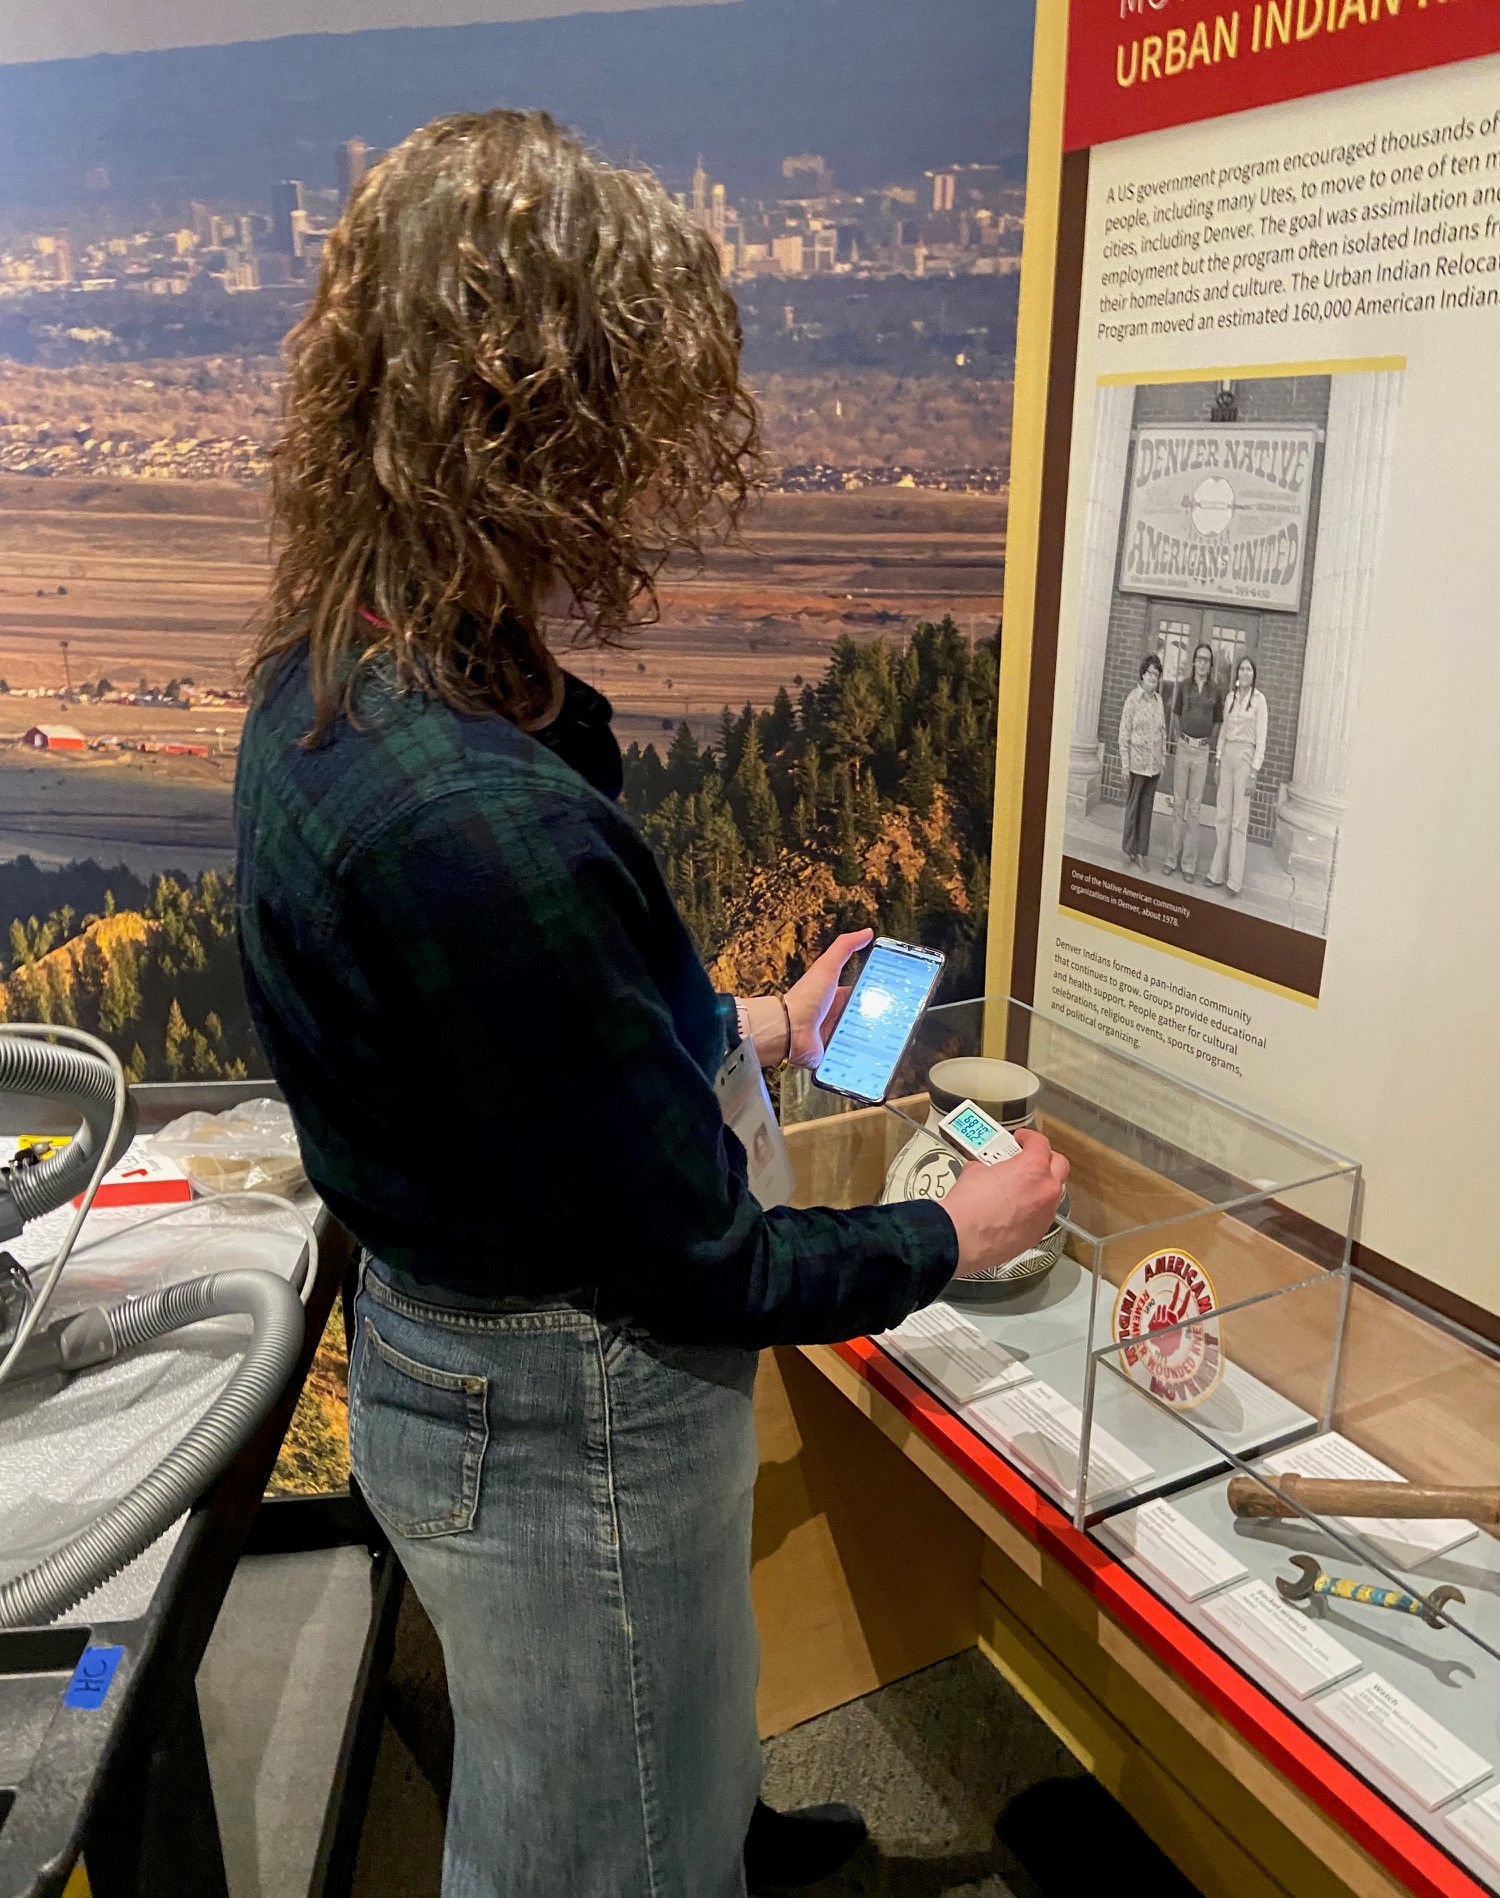 Photo of a museum staff member holding their smartphone in one hand and another snall electronic device in the other. They look to be comparing the data between the two devices in an effort to check the environmental readings of the exhibition environment.